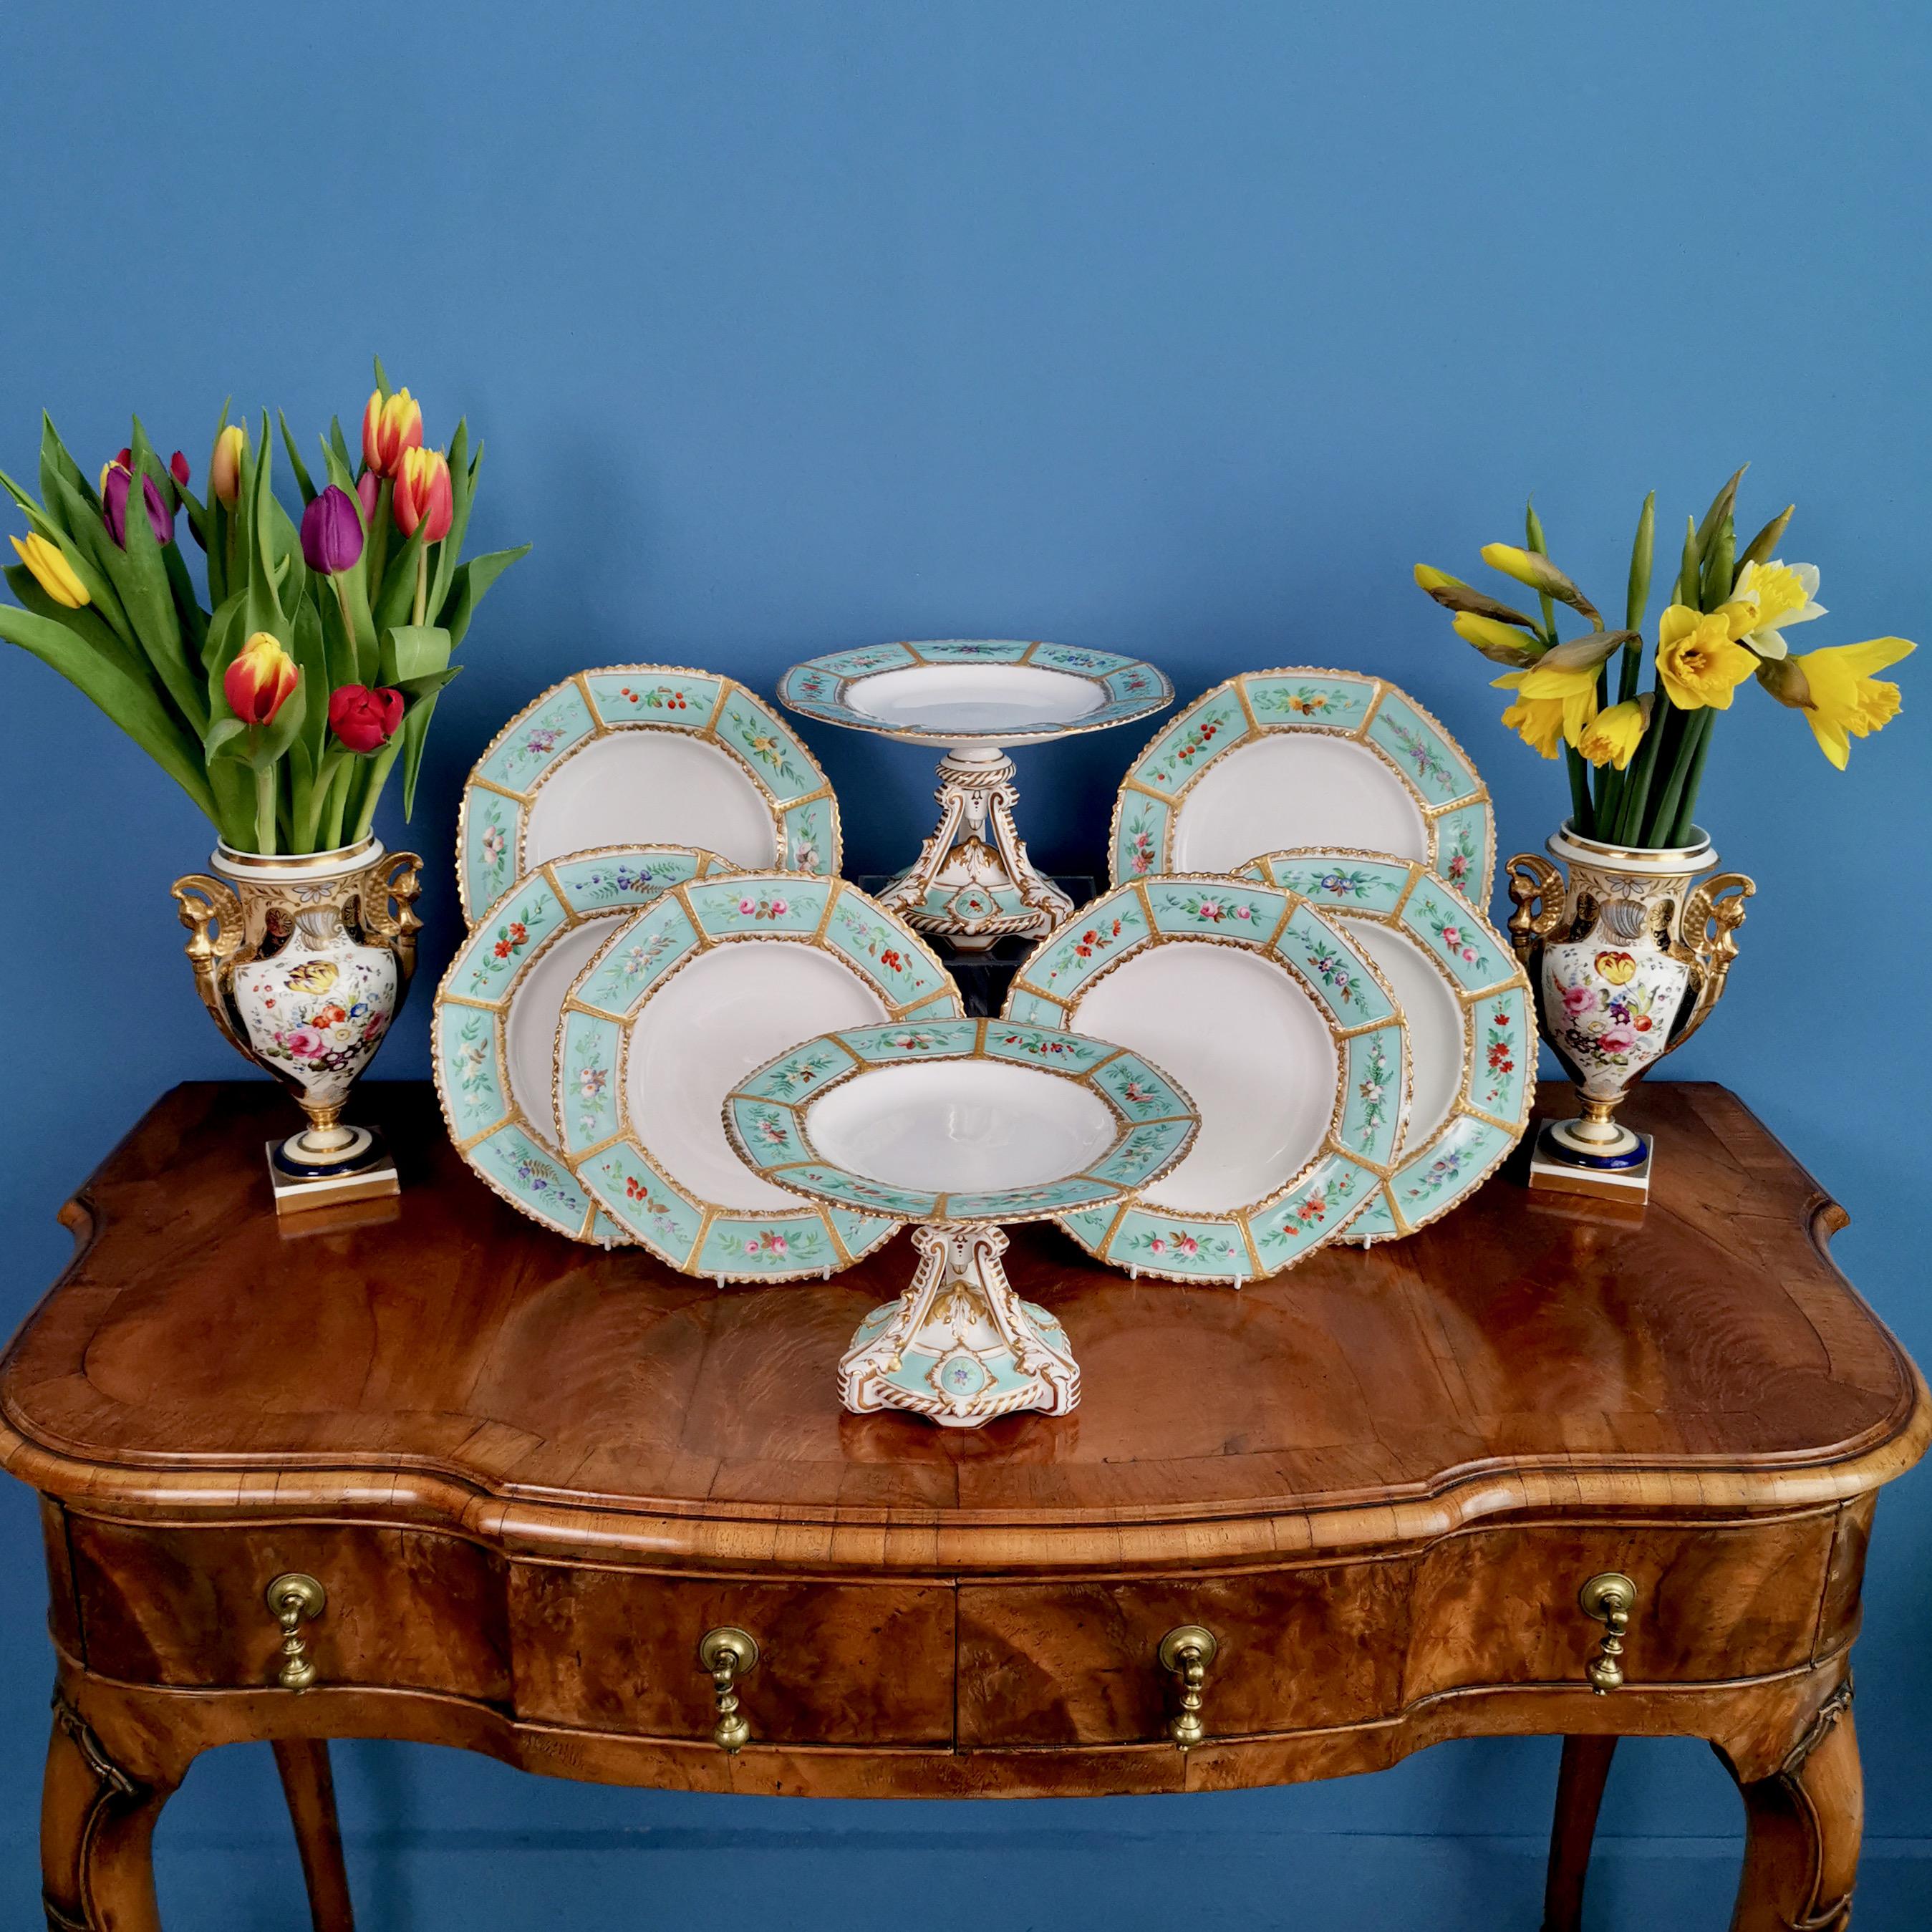 On offer is a beautiful dessert service made by a Staffordshire factory in about 1860. The items have a fresh duck egg blue ground with little printed flowers in the reserves and rich gilding. The service consists of six plates and two stunning high